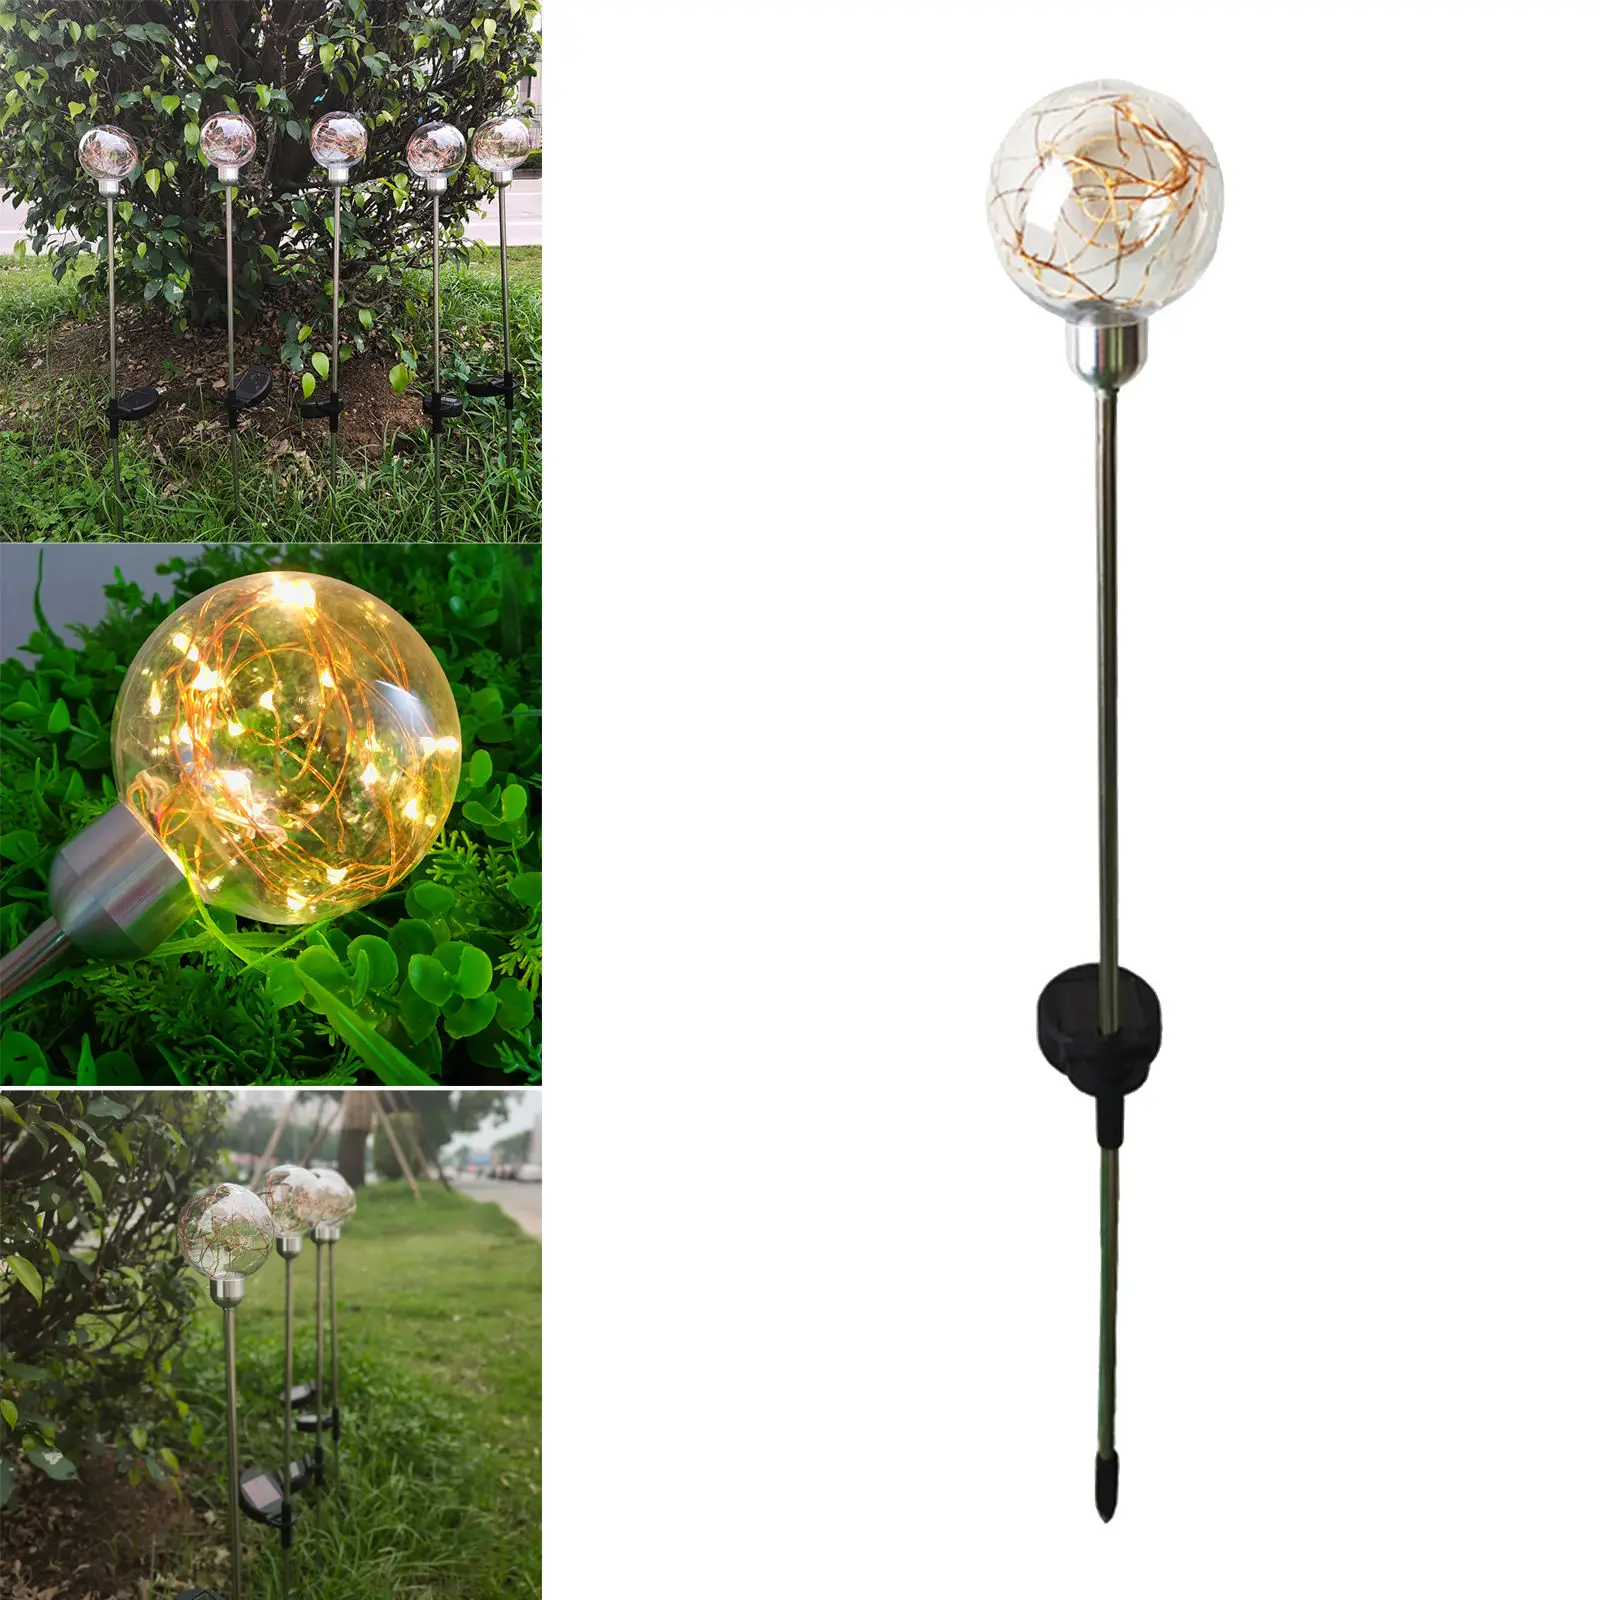 Garden Solar Pathway Light Waterproof Path Yard Patio Ground Stainless Steel Ball Shape Led Lights for Wedding Party Decorative